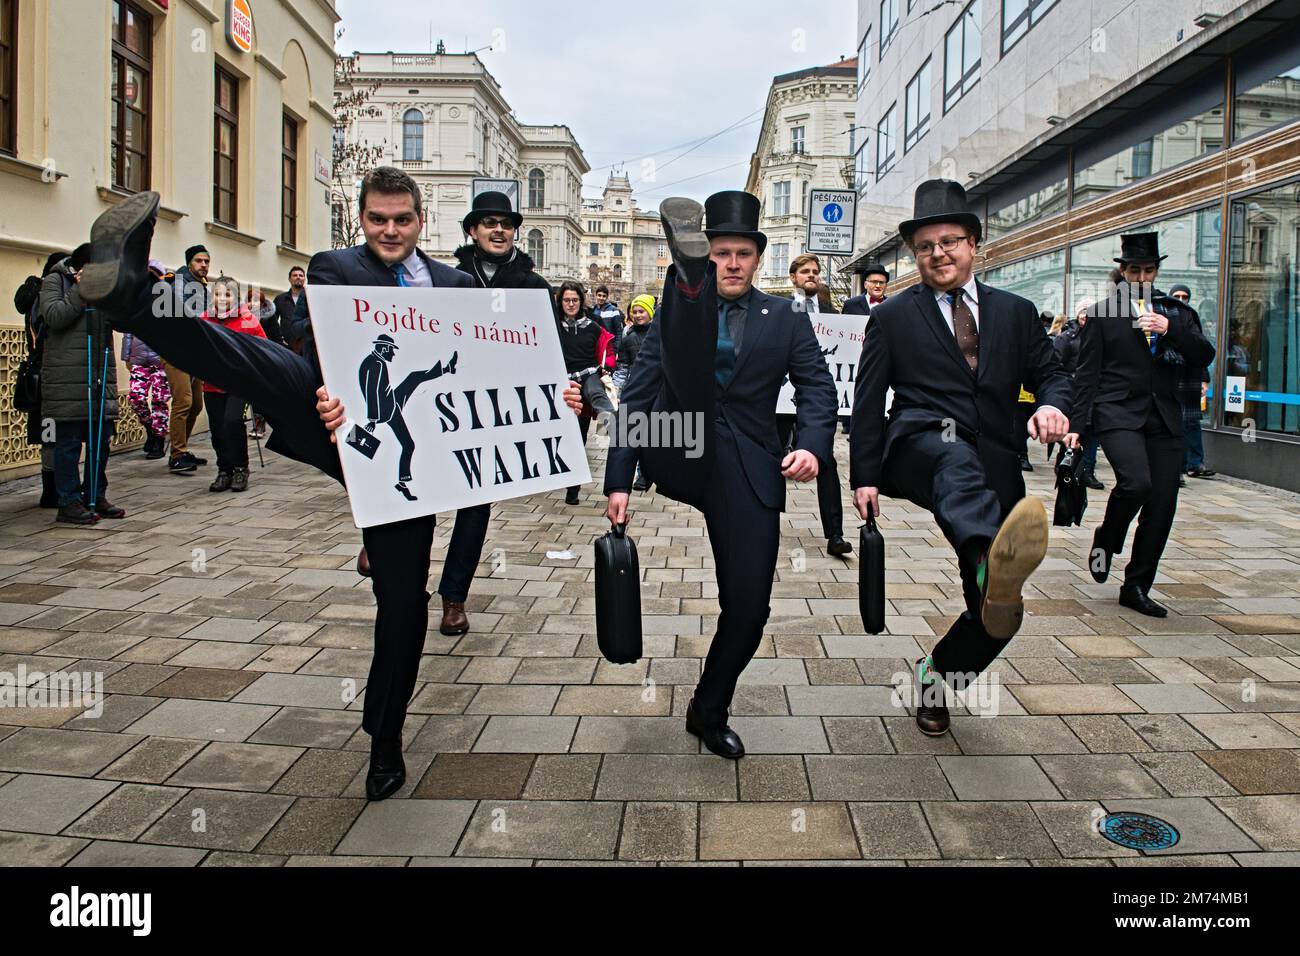 Tenth mock event called "Silly Walks through Brno" on the occasion of International Silly Walk Day inspired by British comedy troupe Monty Python. Participants meet outside Supreme Administrative Court at Justice statue in Brno, Czech Republic, January 7, 2023. (CTK Photo/Patrik Uhlir) Stock Photo